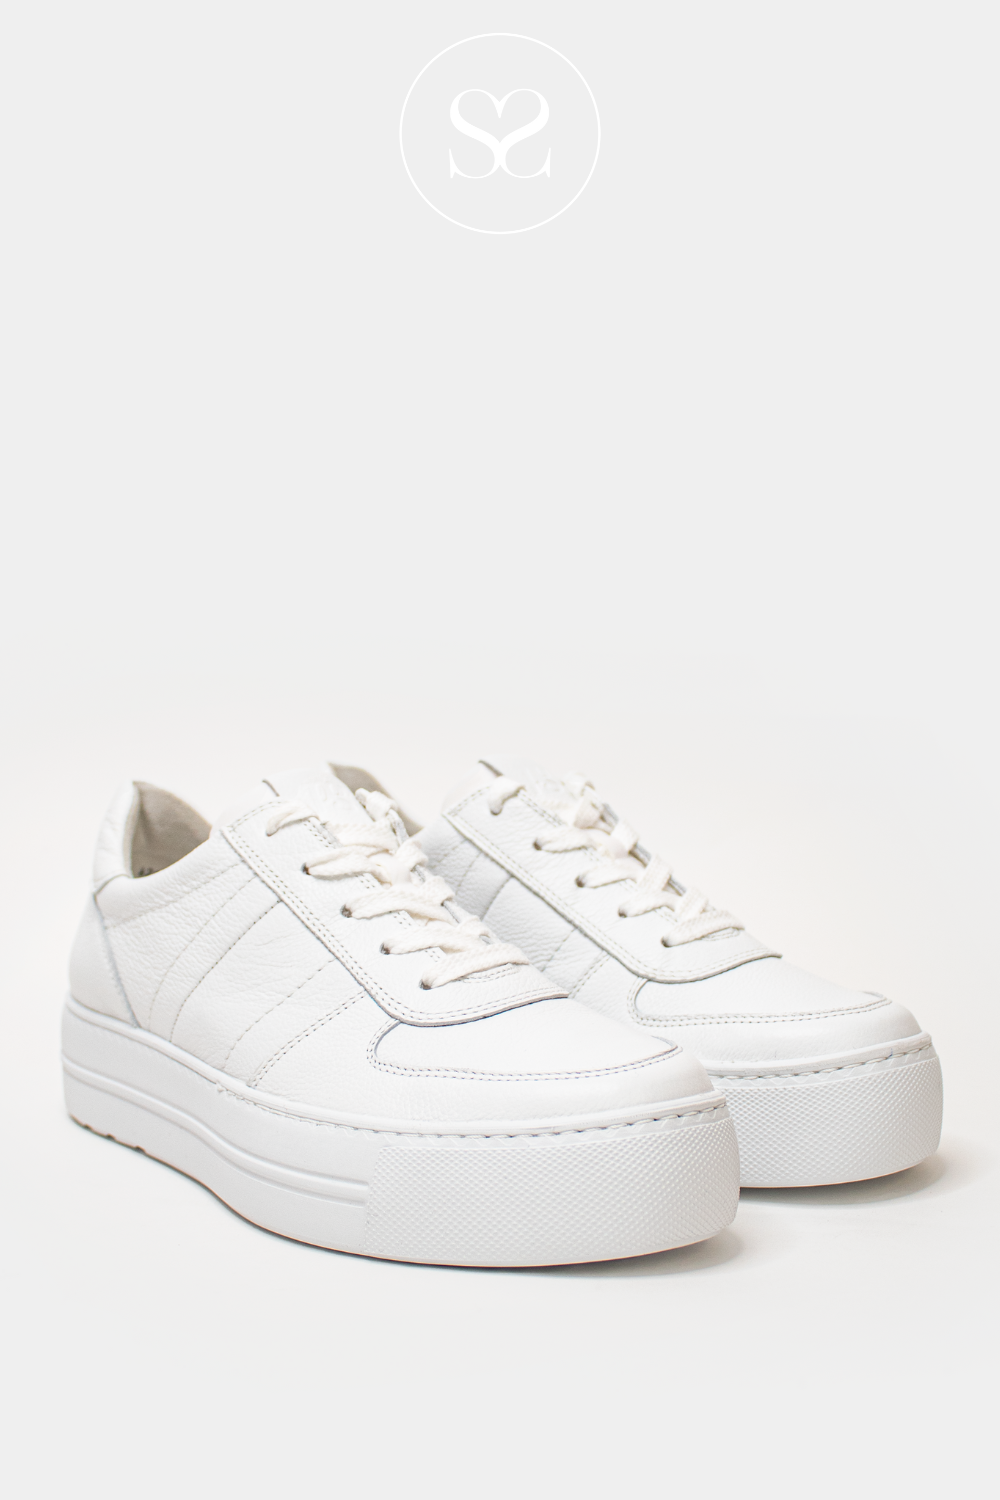 PAUL GREEN 5230 WHITE LACED FLATFORM RETRO TRAINERS